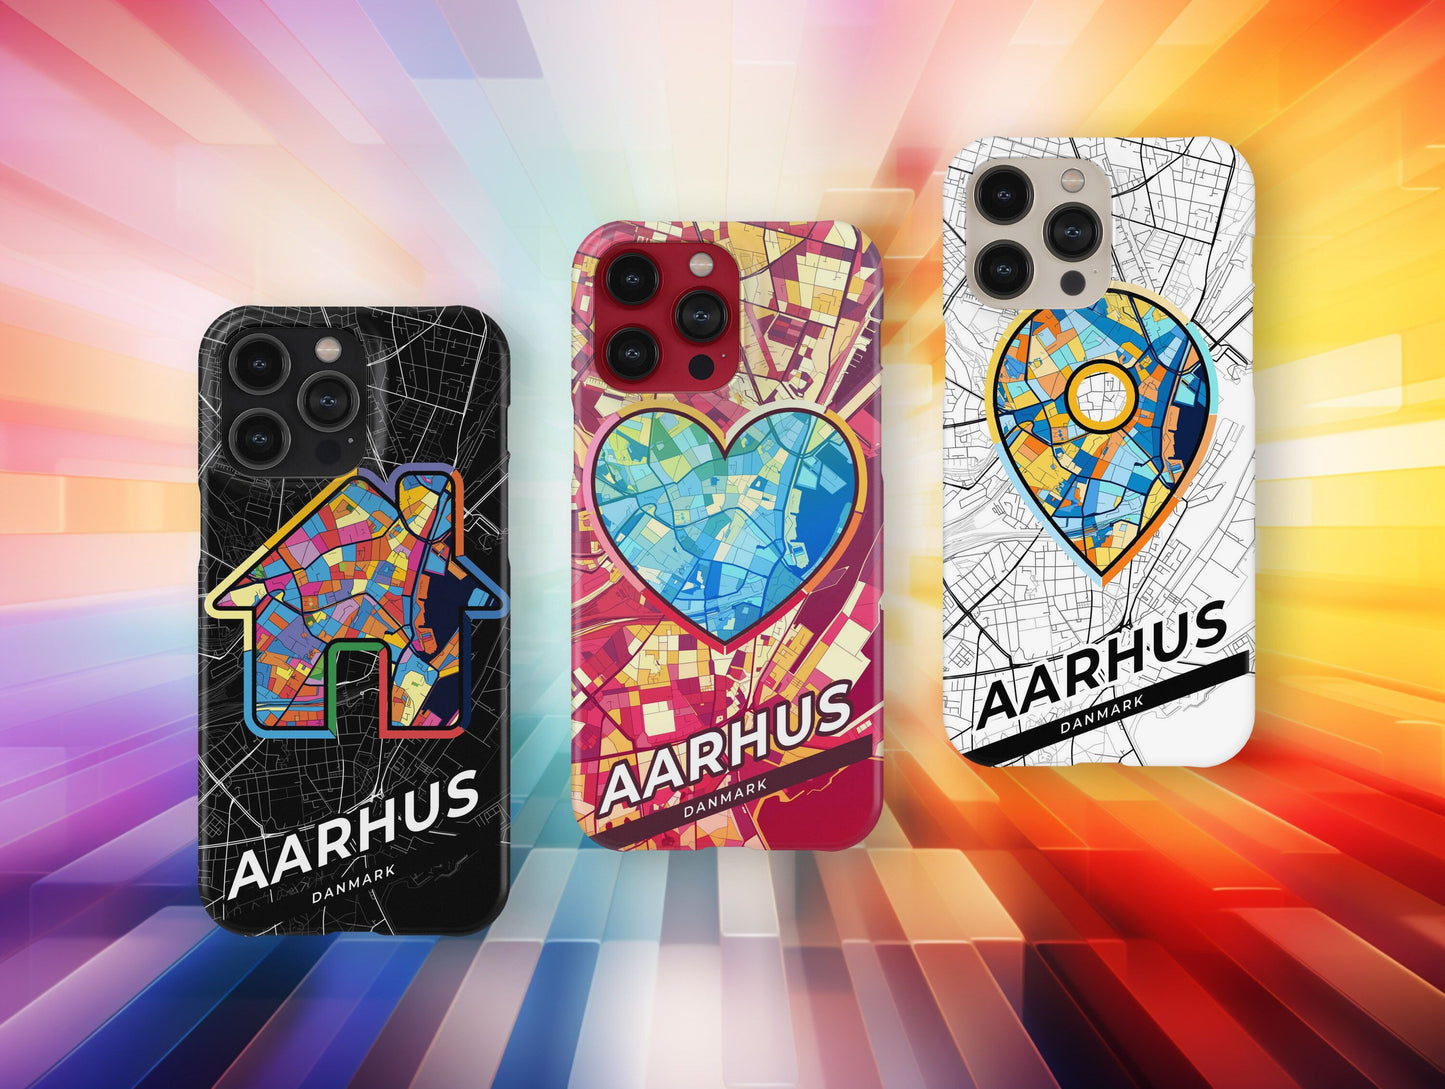 Aarhus Danmark slim phone case with colorful icon. Birthday, wedding or housewarming gift. Couple match cases.